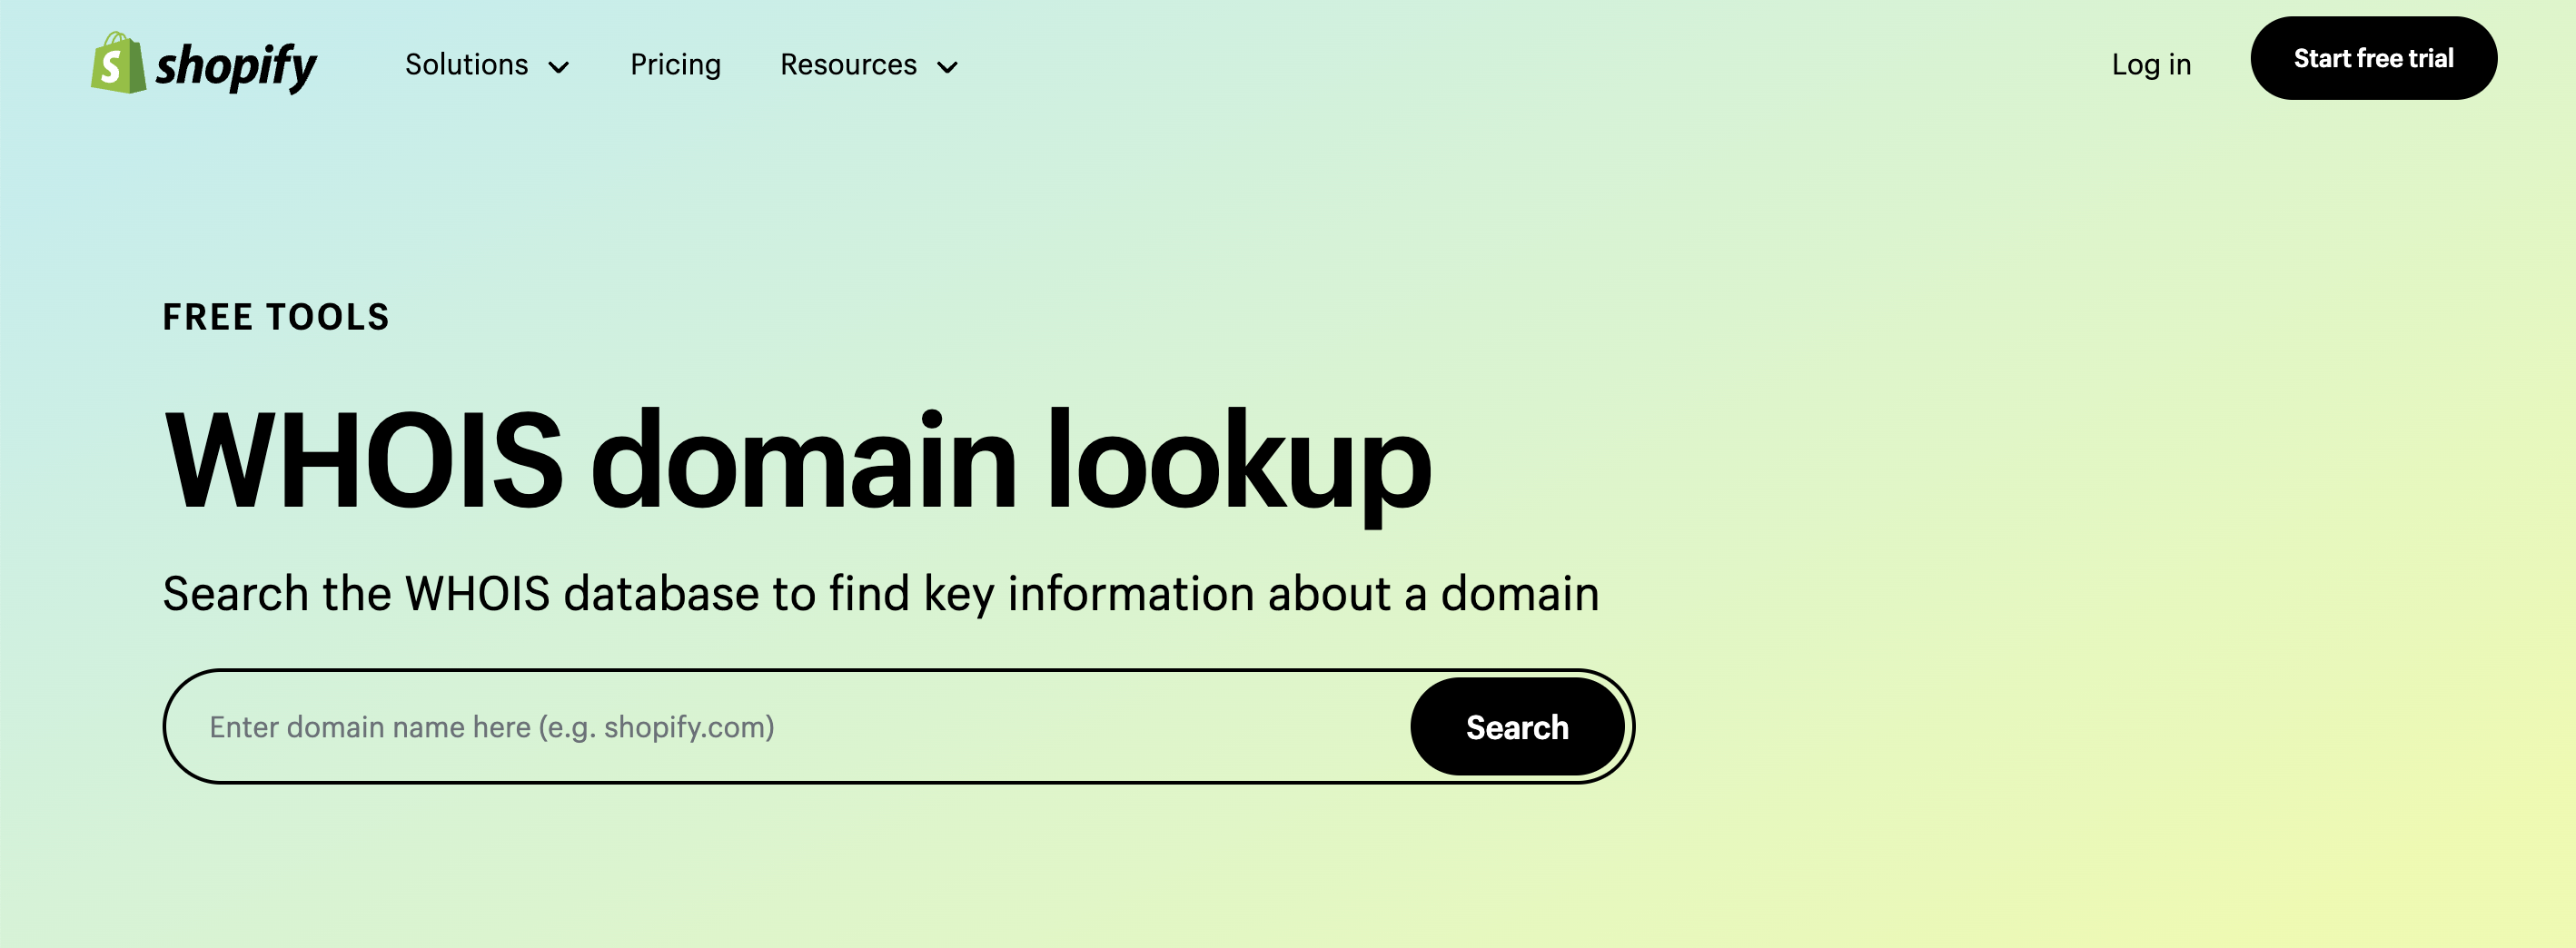 Shopify's free WHOIS domain lookup tool to find out who owns a domain name